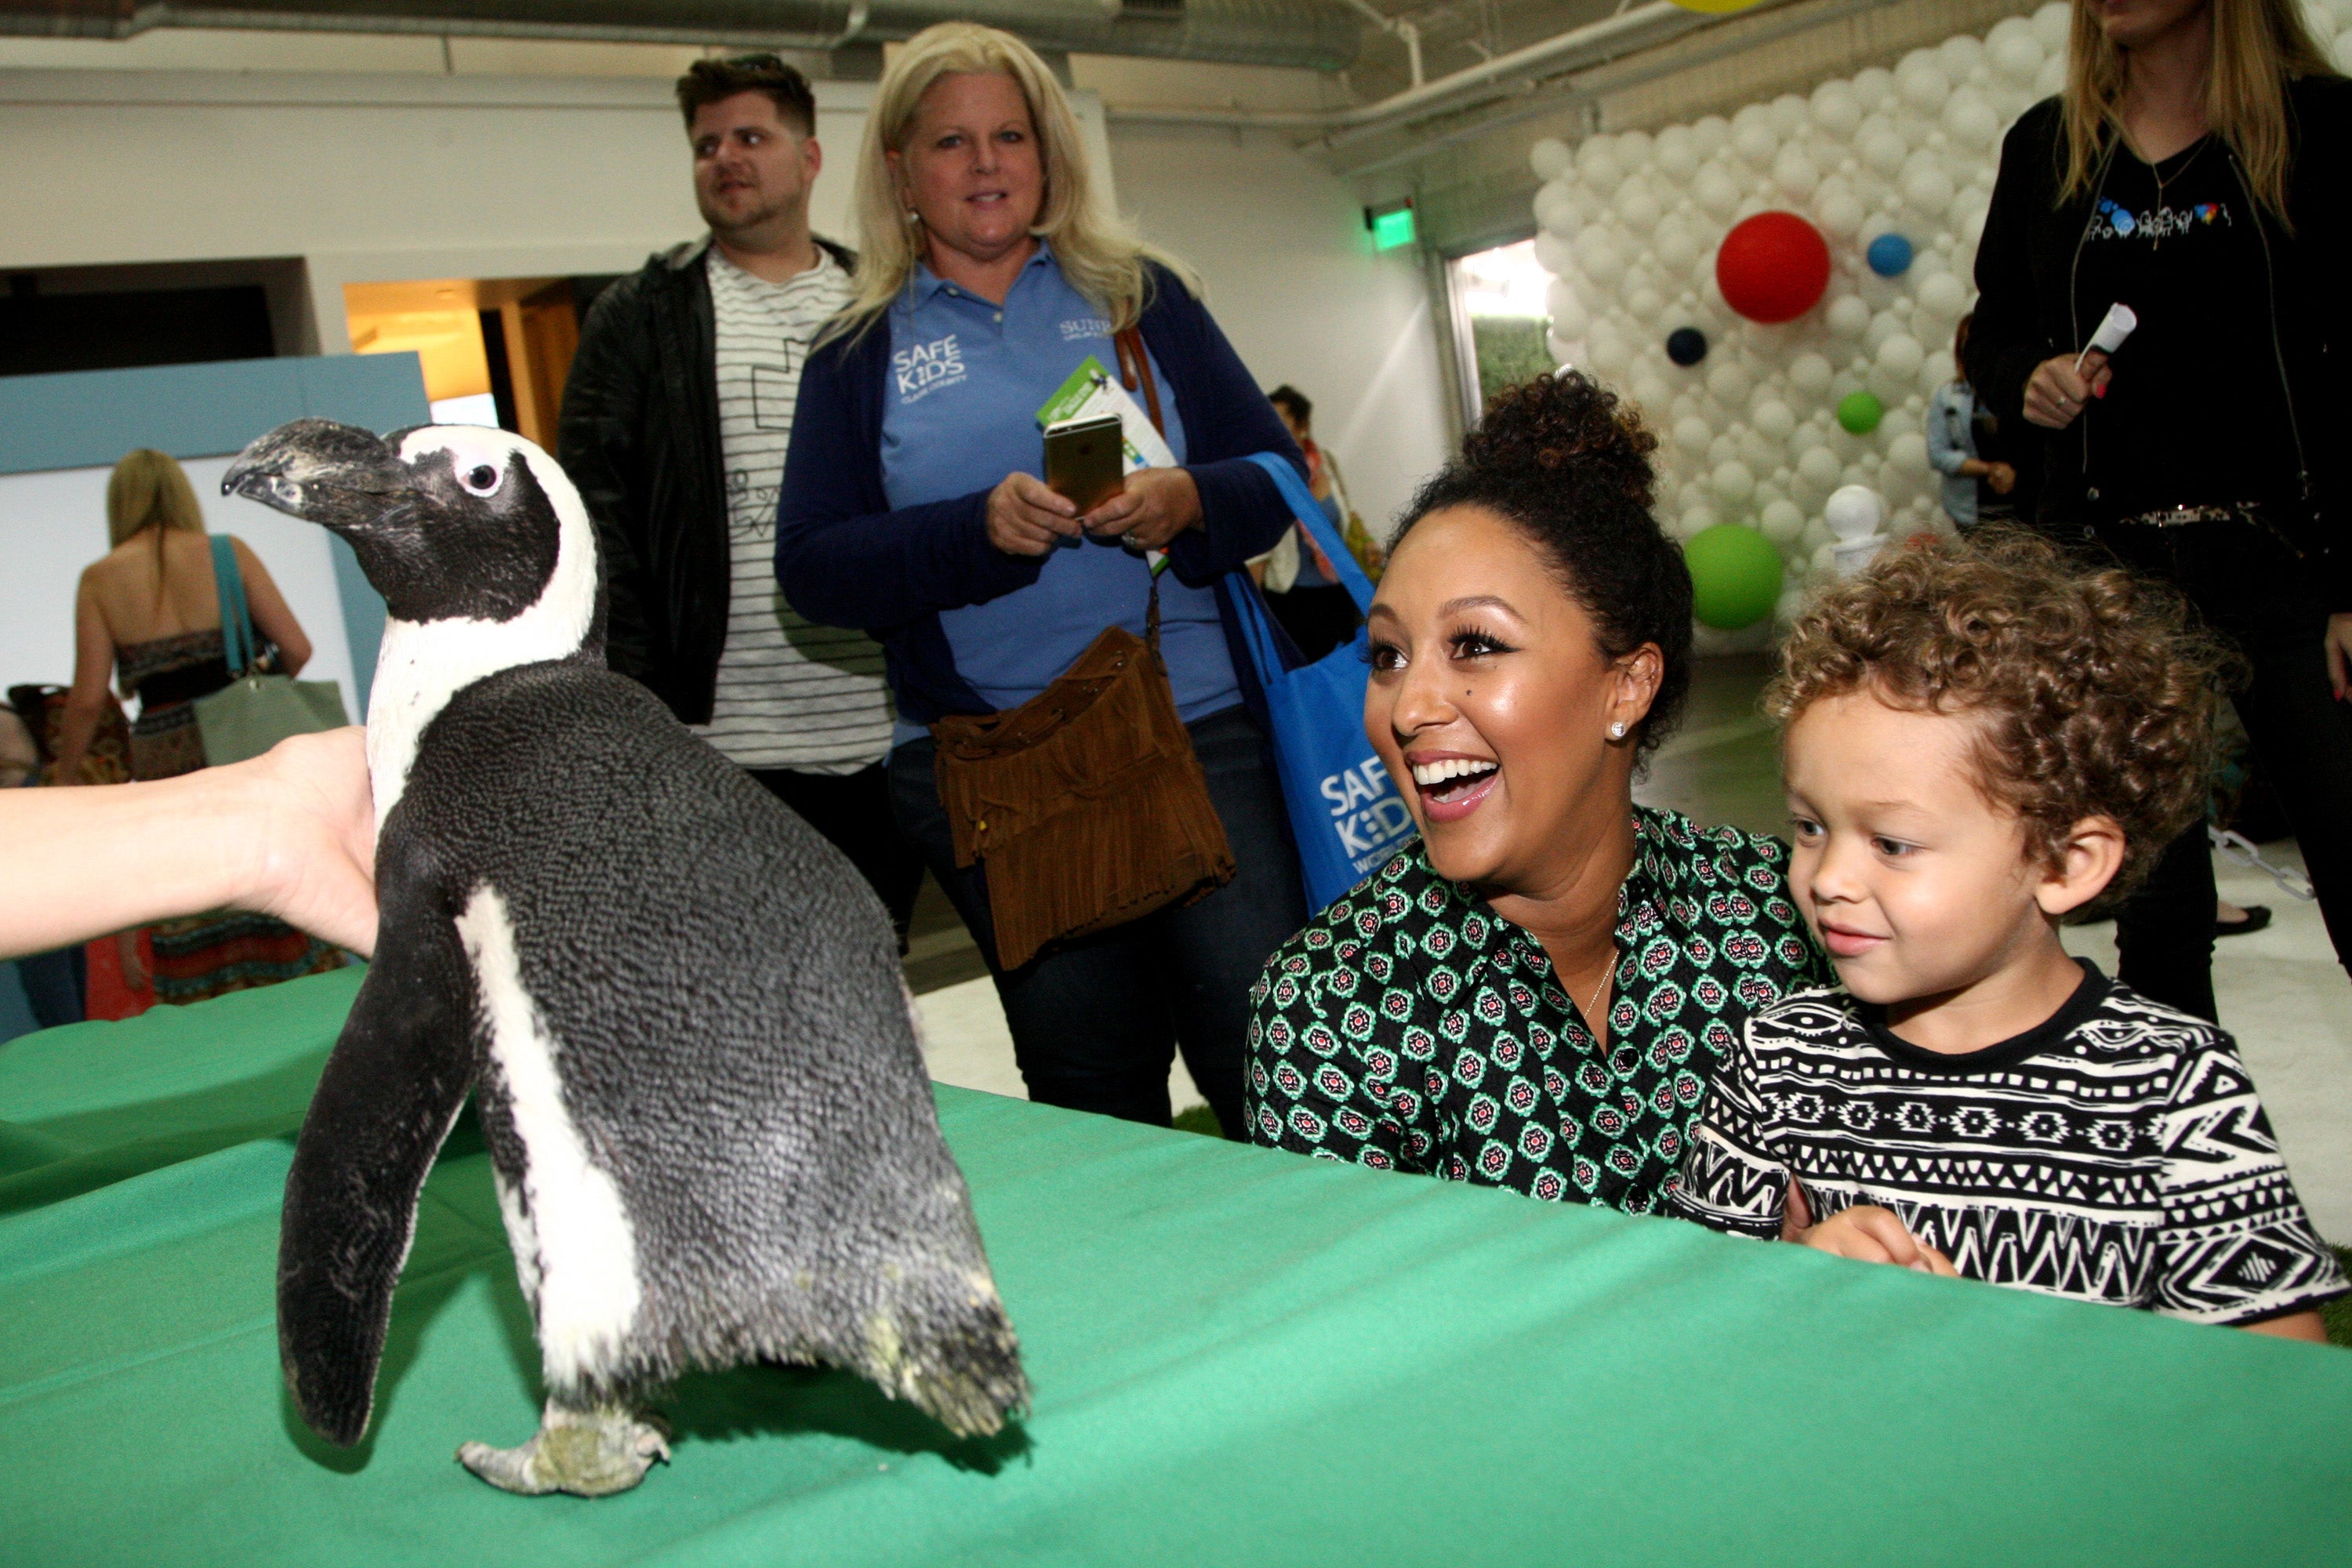 Tamera Mowry-Housley's Secret For Getting Her Son Excited About Cooking
